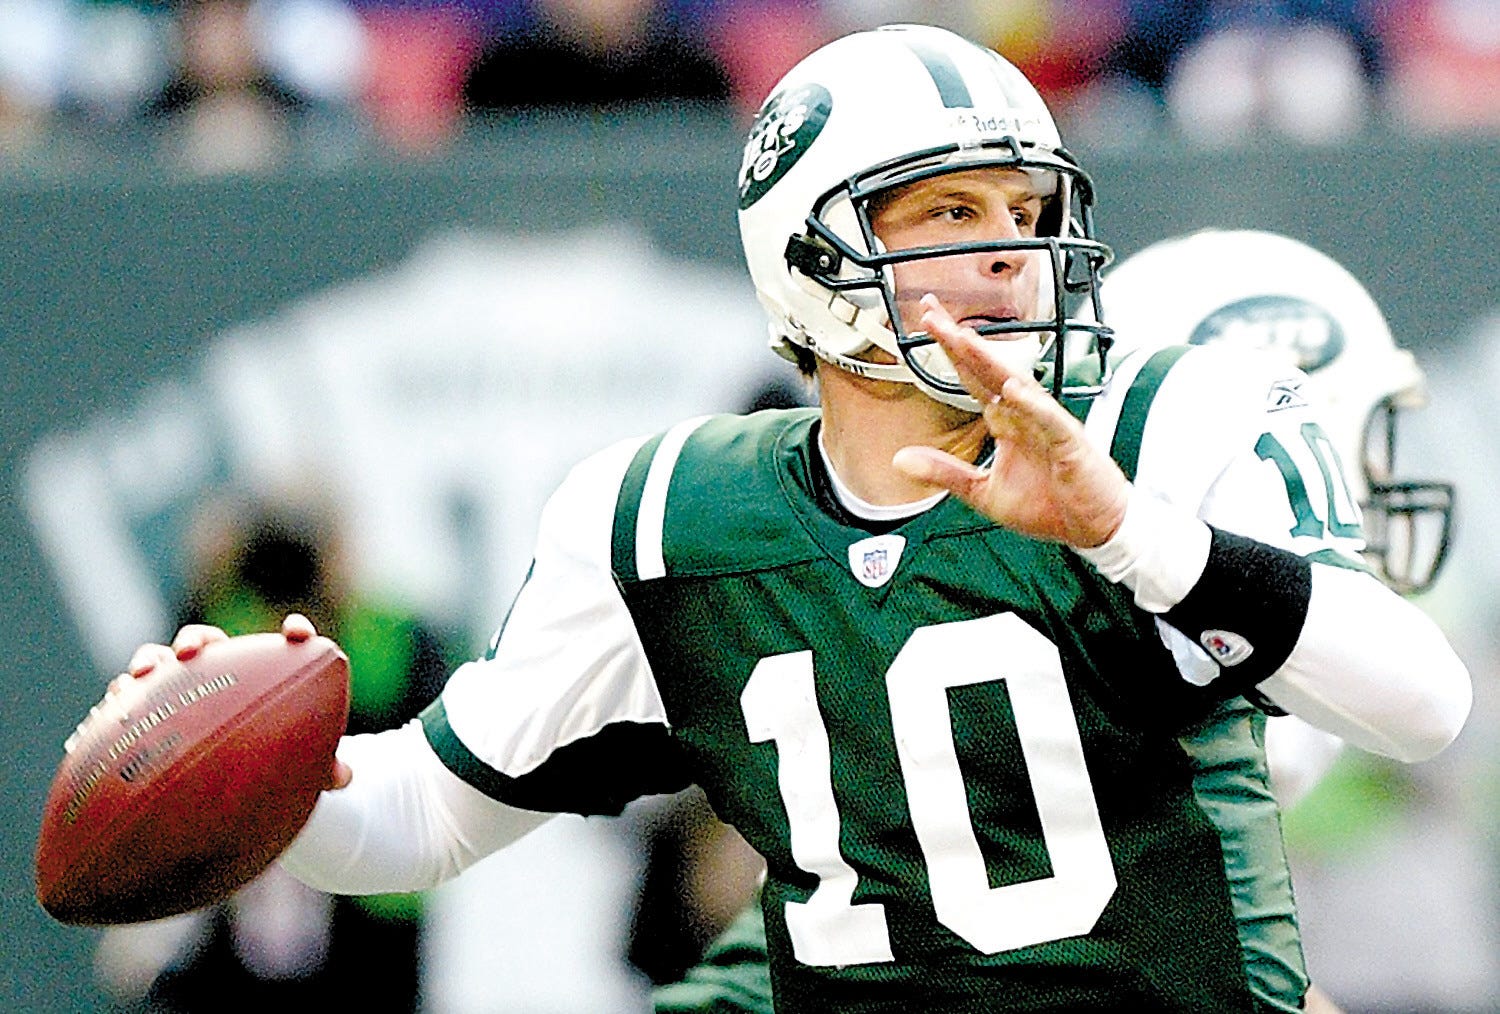 A closer look at NFL comeback player of the year Chad Pennington